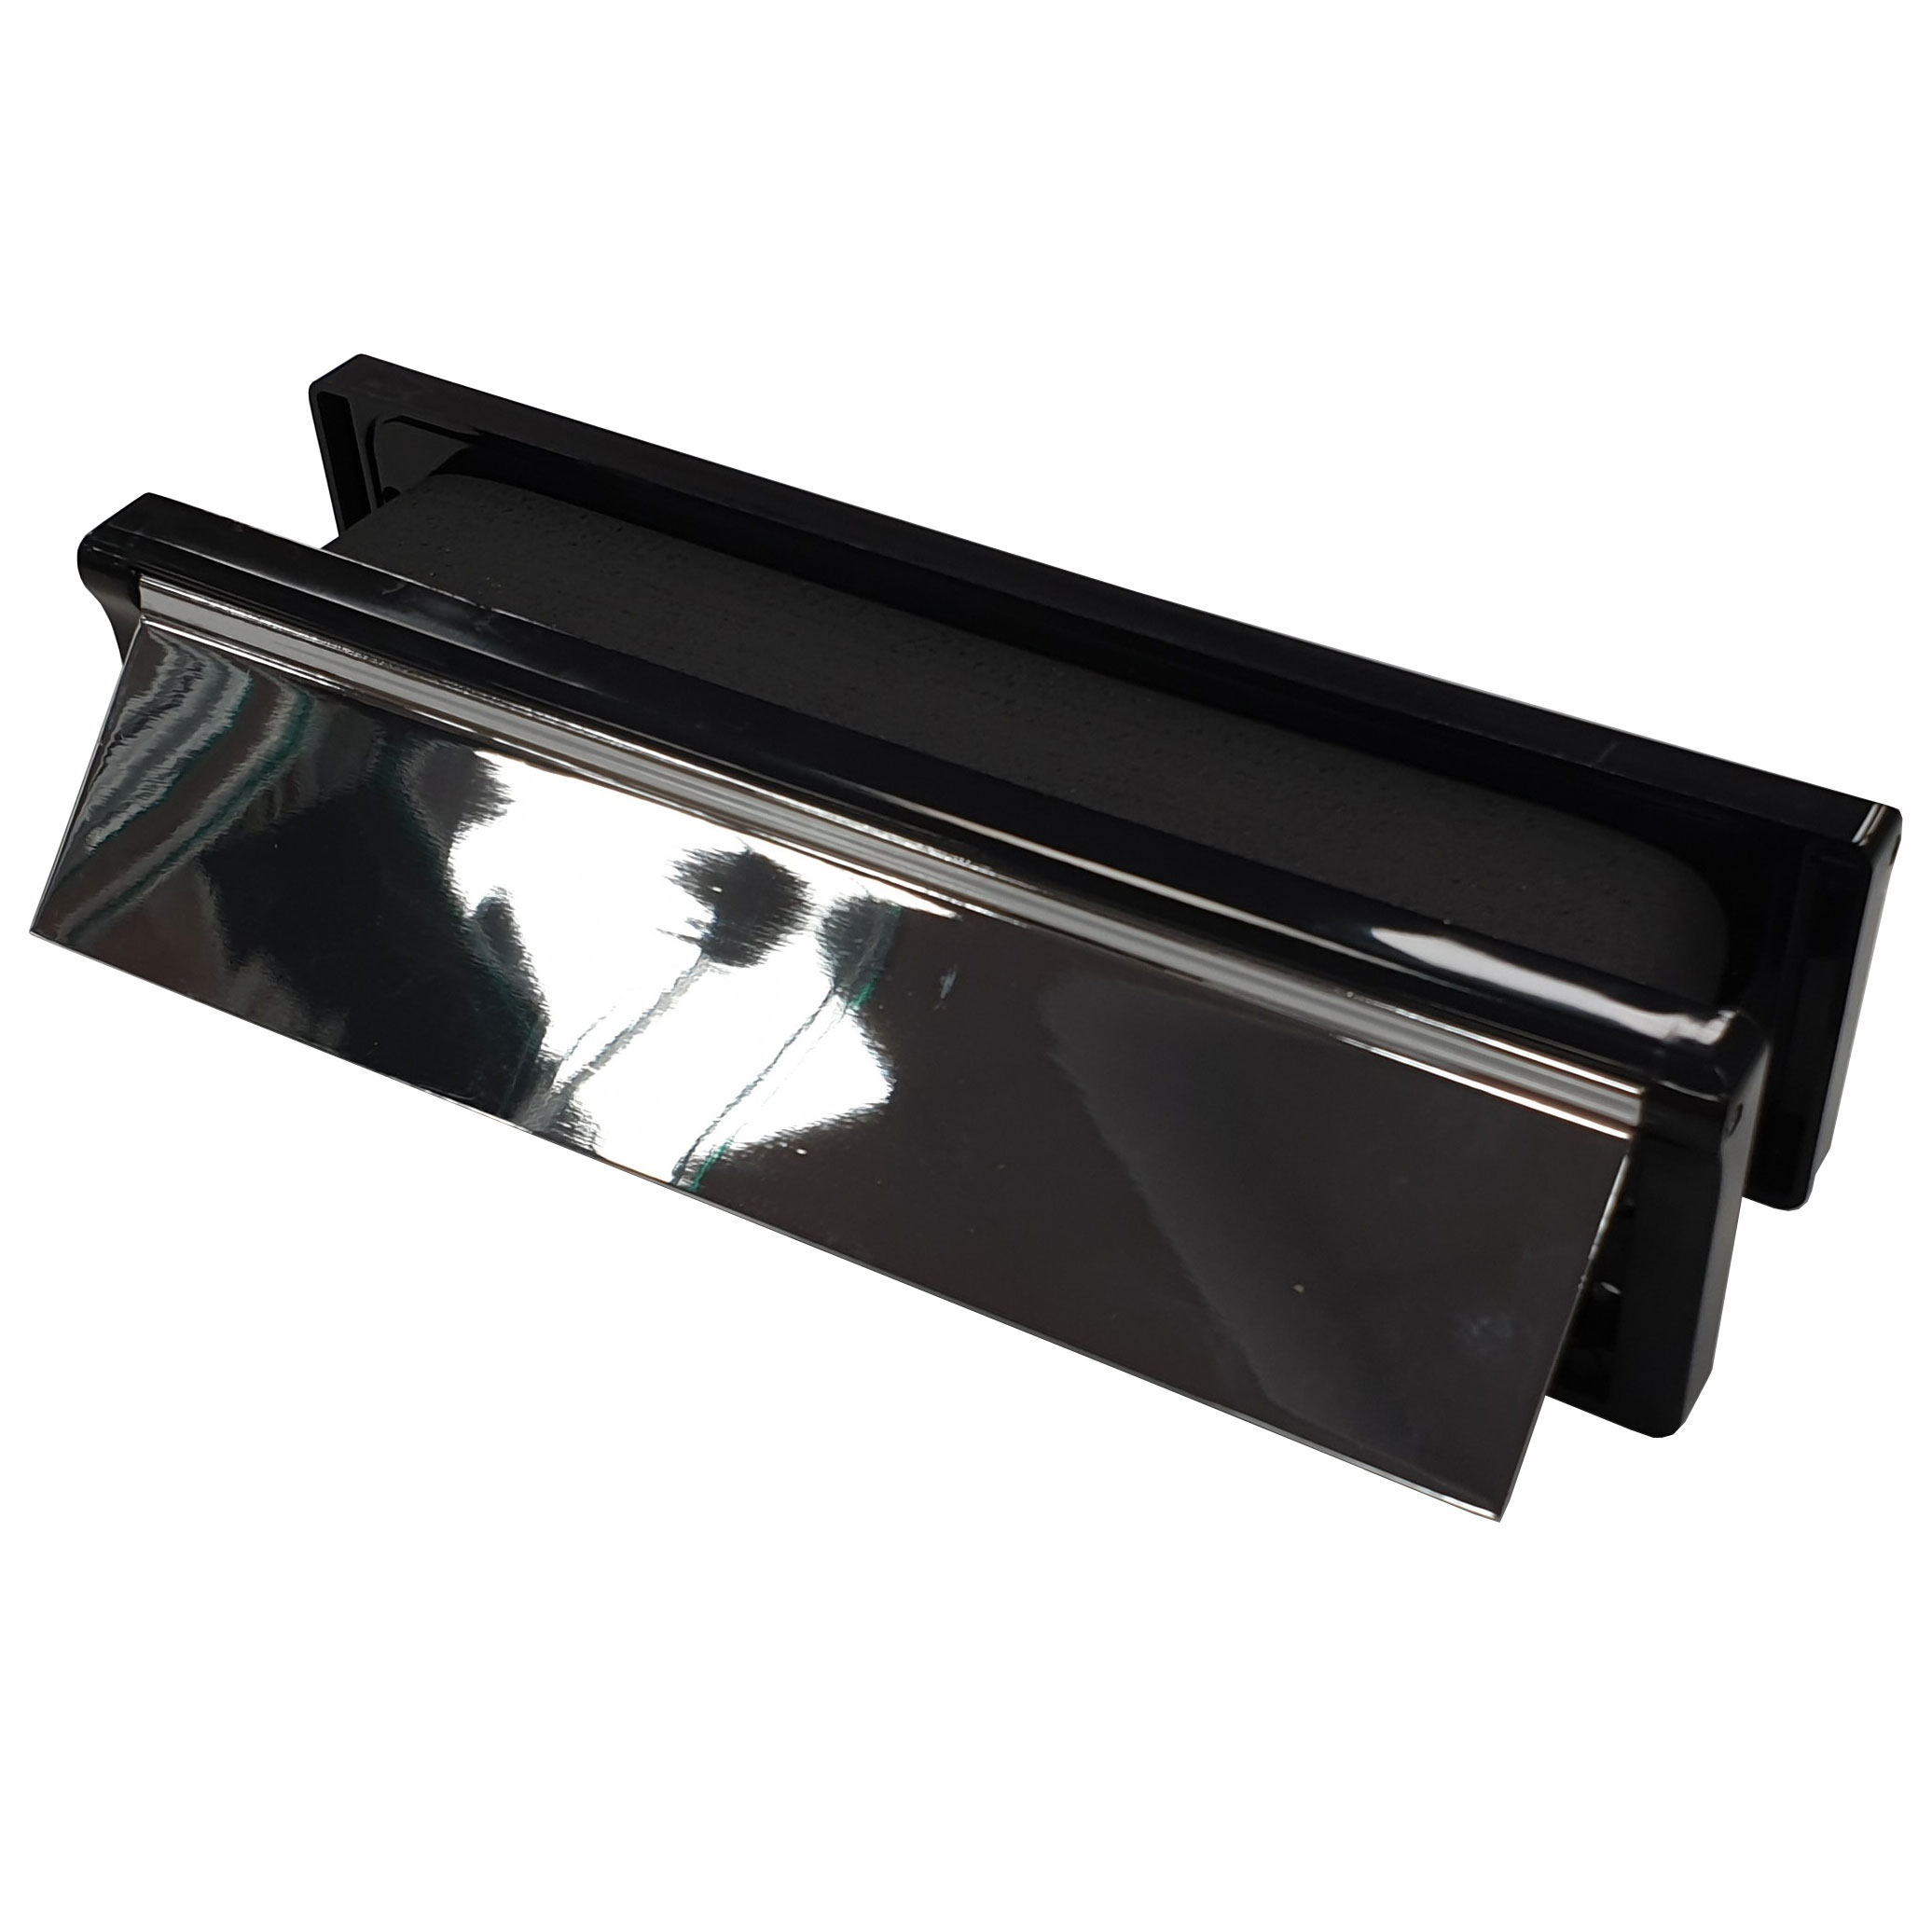 12 inch Intumescent Letter Boxes Chrome - Black frame